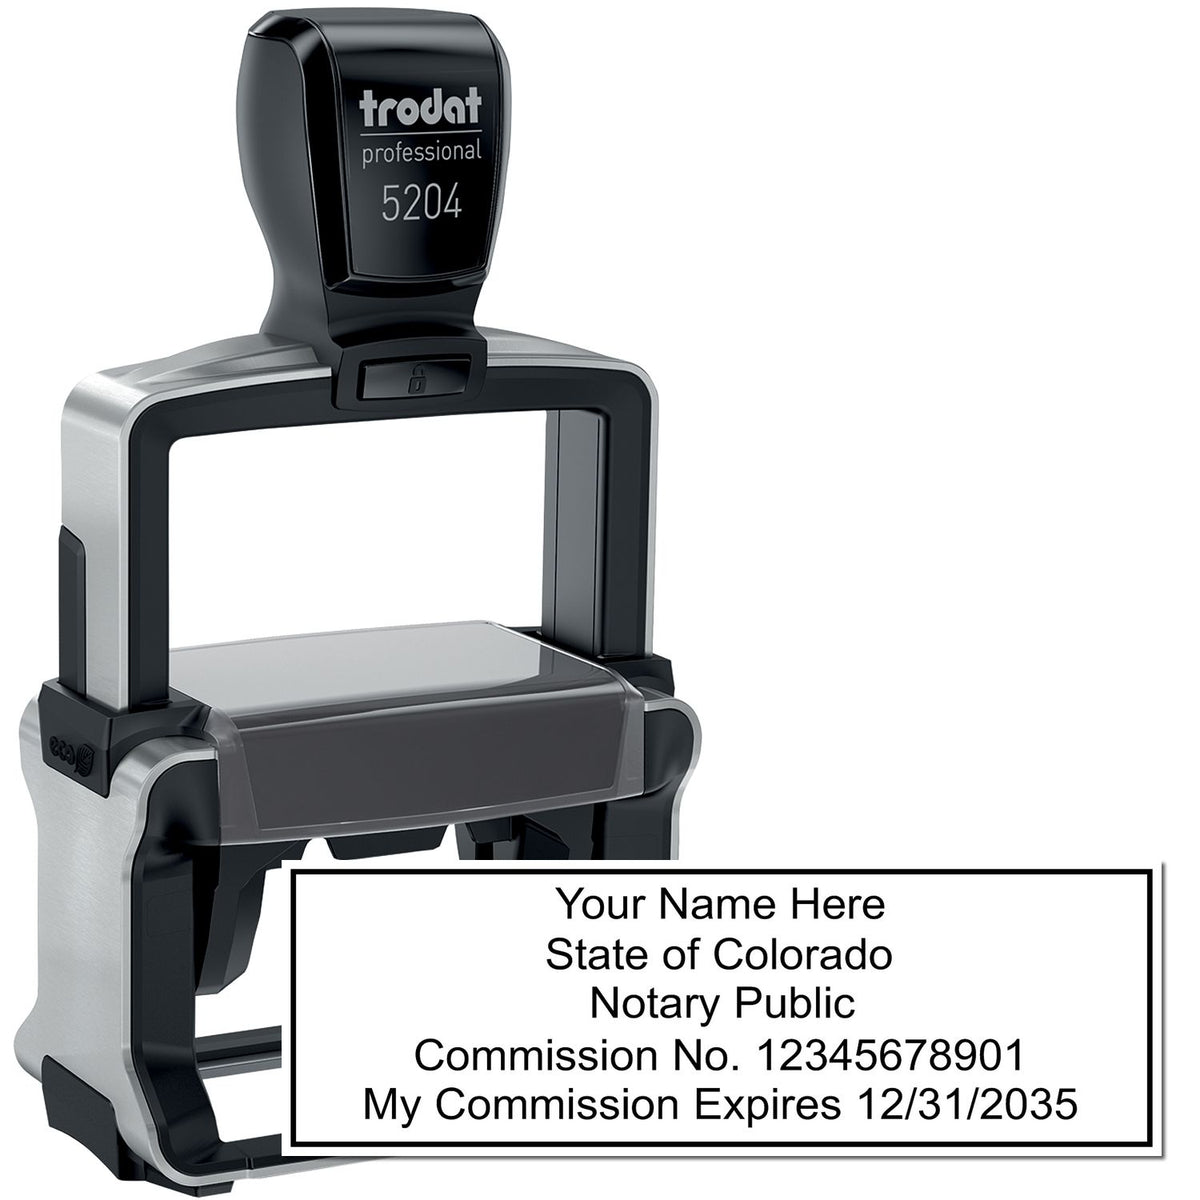 The main image for the Heavy-Duty Colorado Rectangular Notary Stamp depicting a sample of the imprint and electronic files